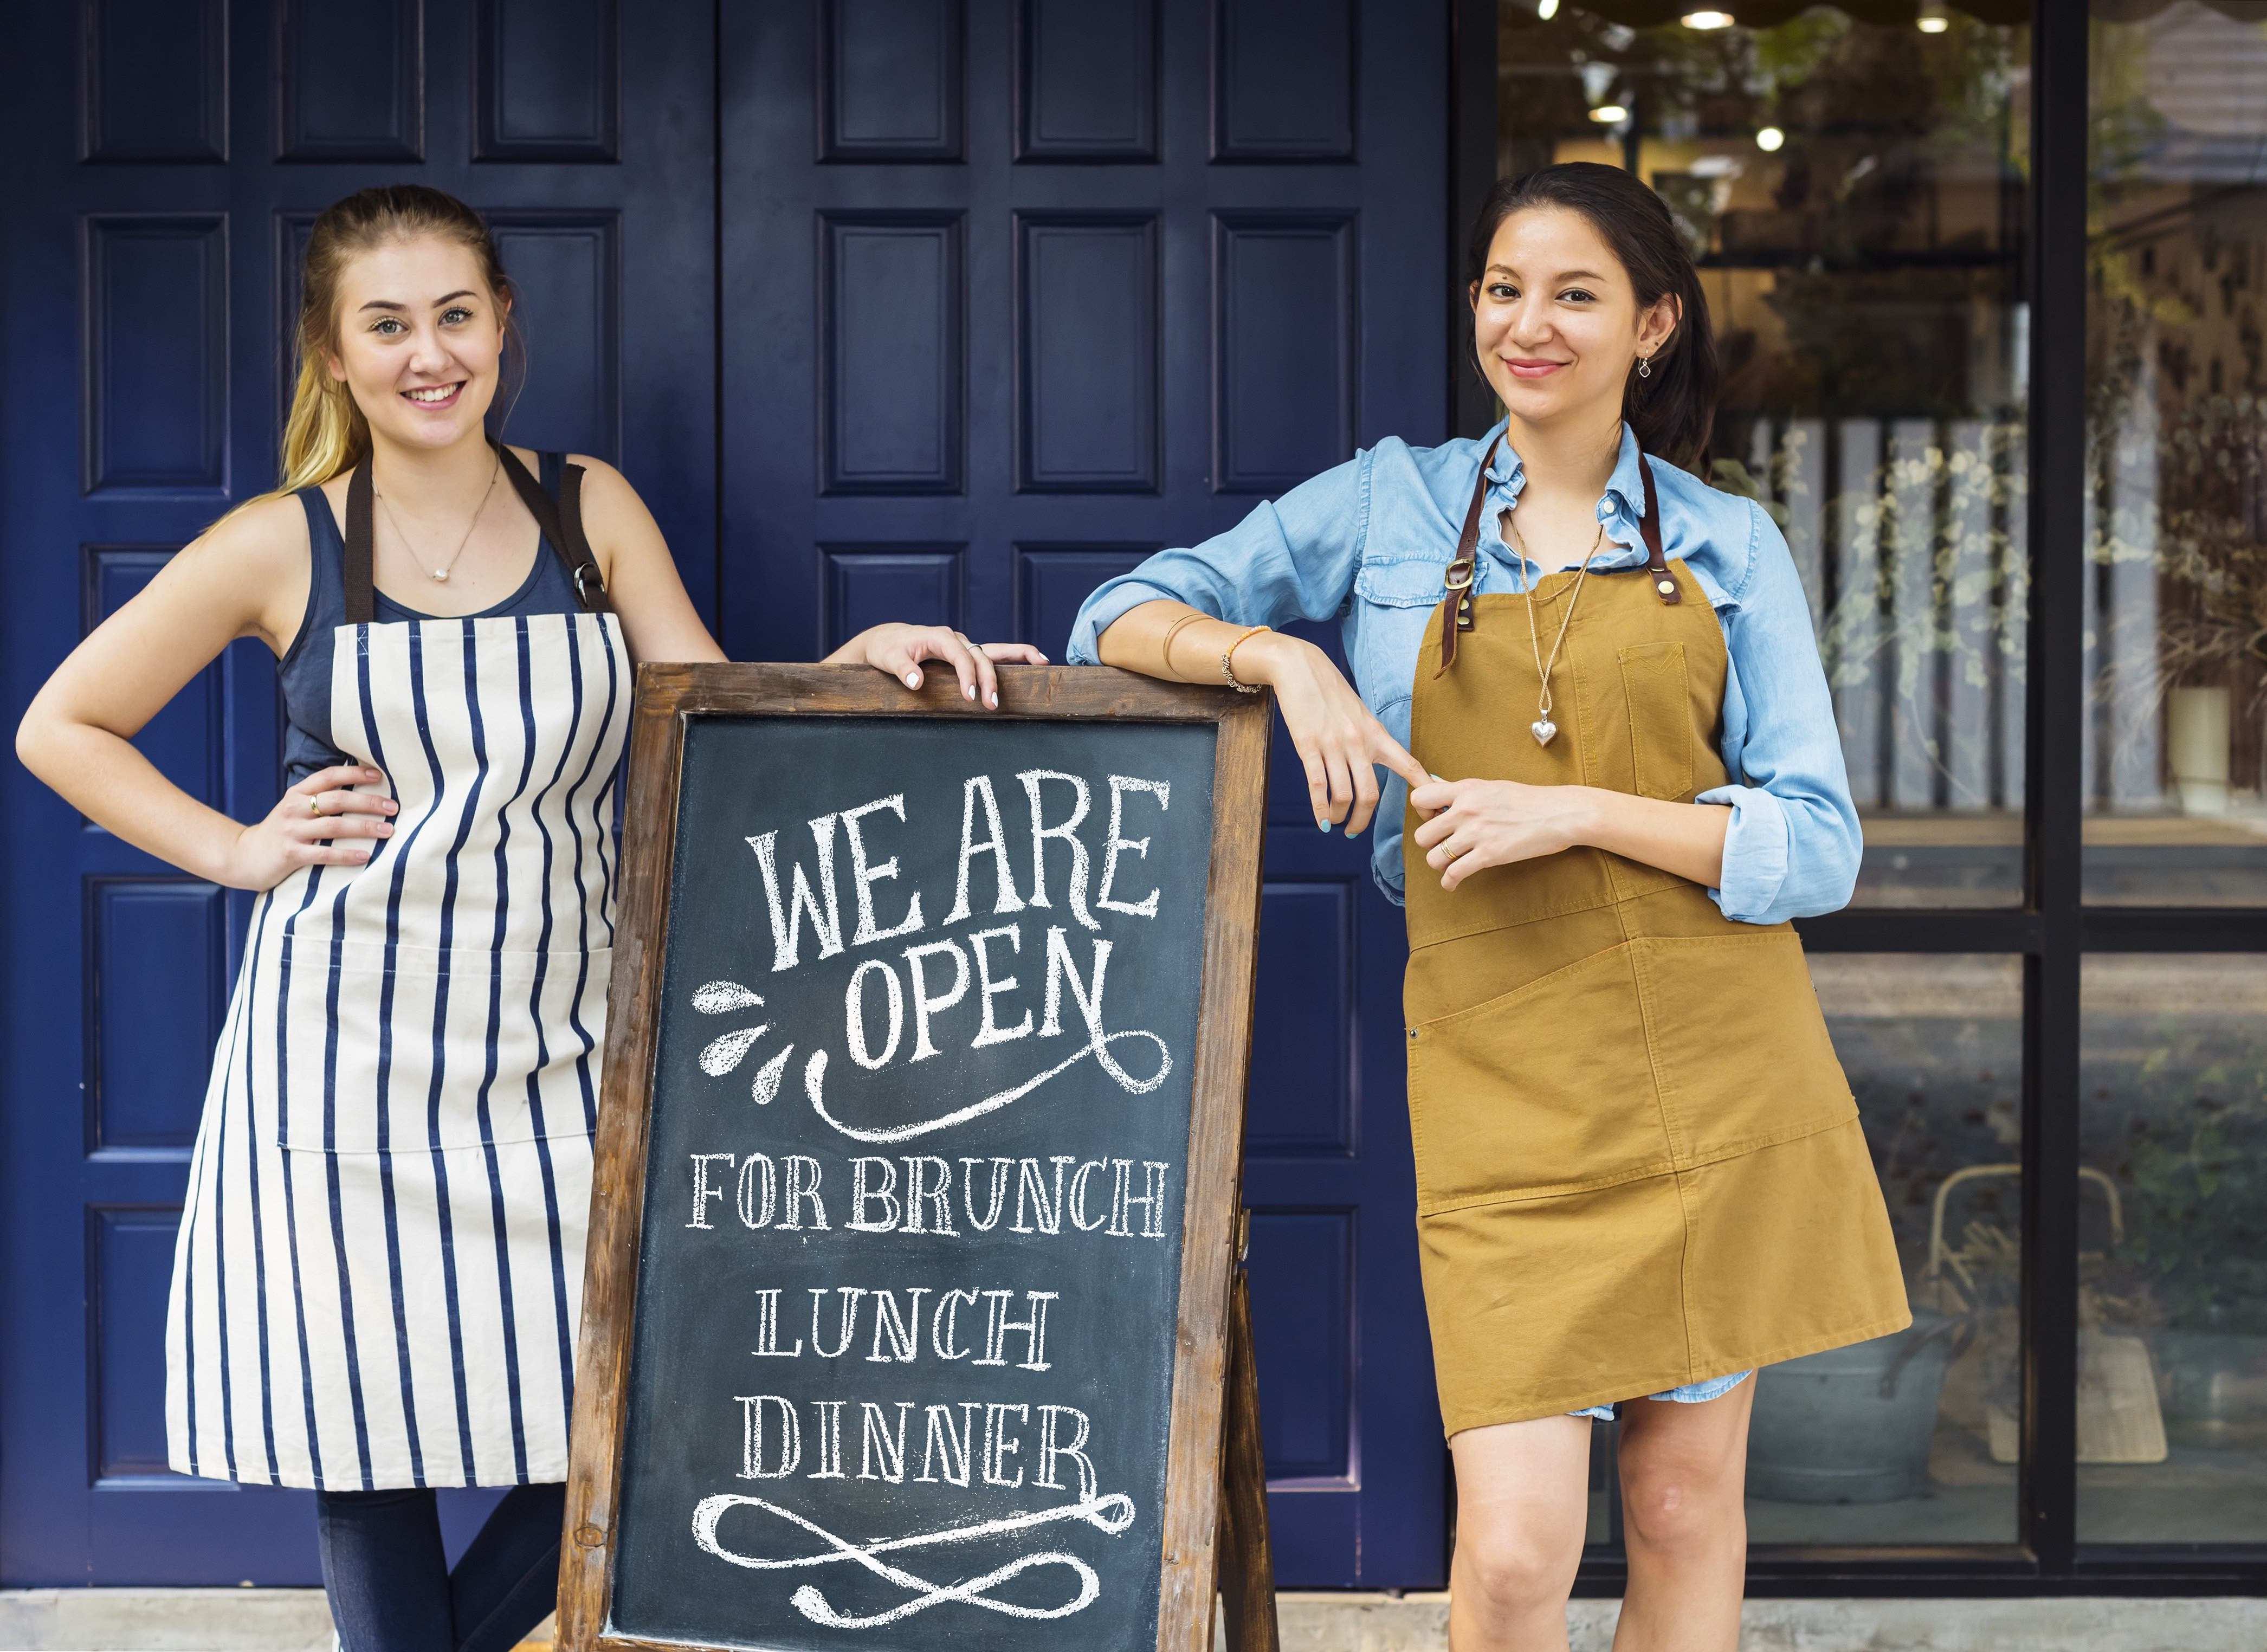 Two young woman smiling and standing in front in front of their business with a "We are open" sign in between them